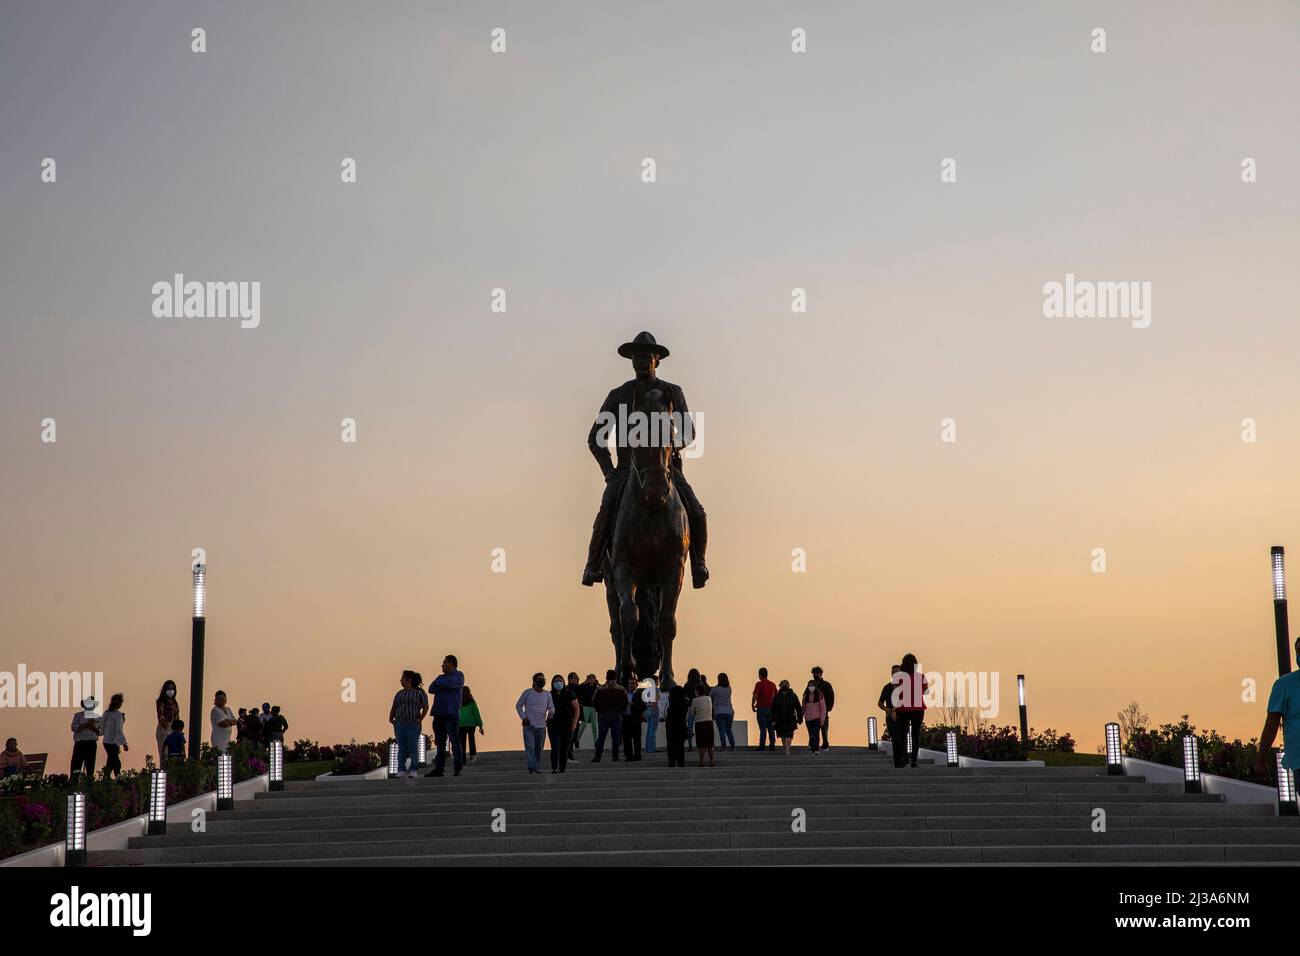 People silhouettes around Felipe Angeles monumental sculpture. This statue is located within the Felipe Angeles International Airport grounds. Stock Photo